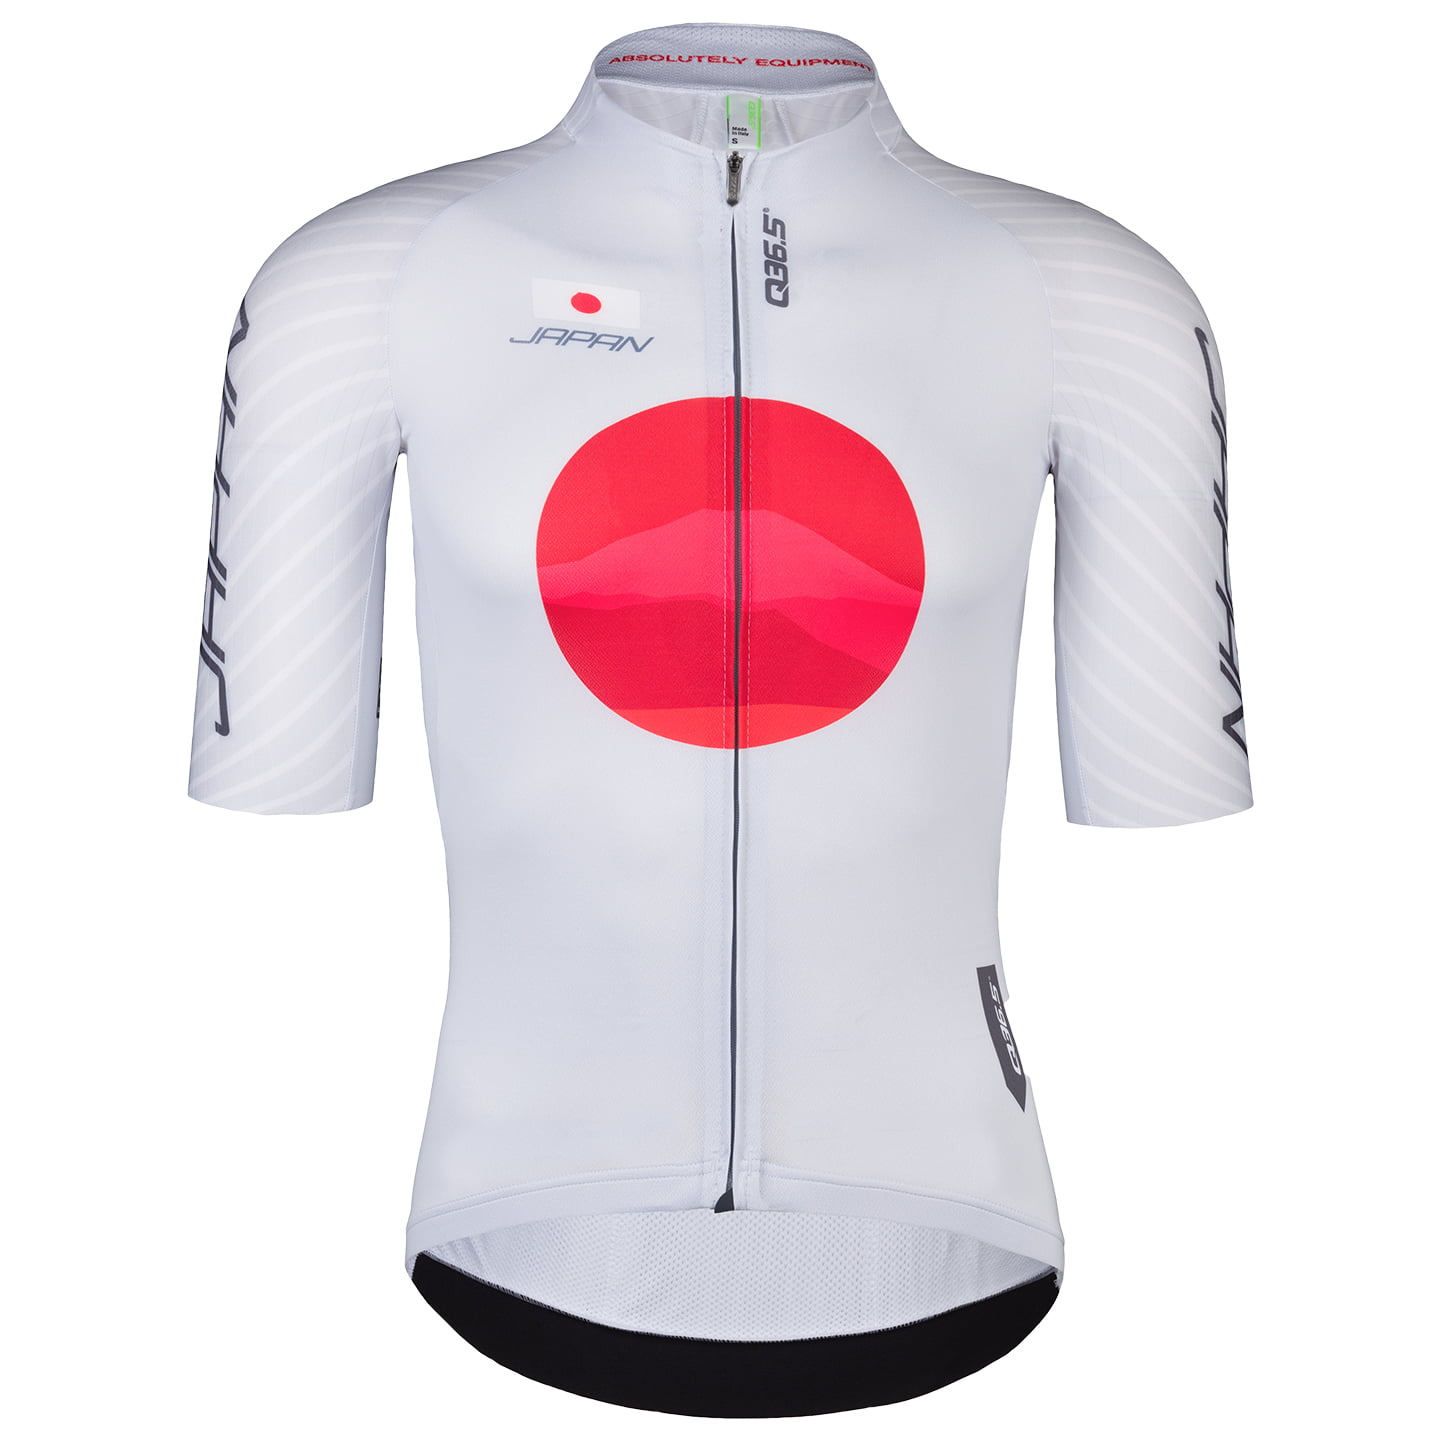 JAPANESE NATIONAL SHORT-SLEEVED JACKET R2 Y 2024 Short Sleeve Jersey, for men, size S, Cycling jersey, Cycling clothing